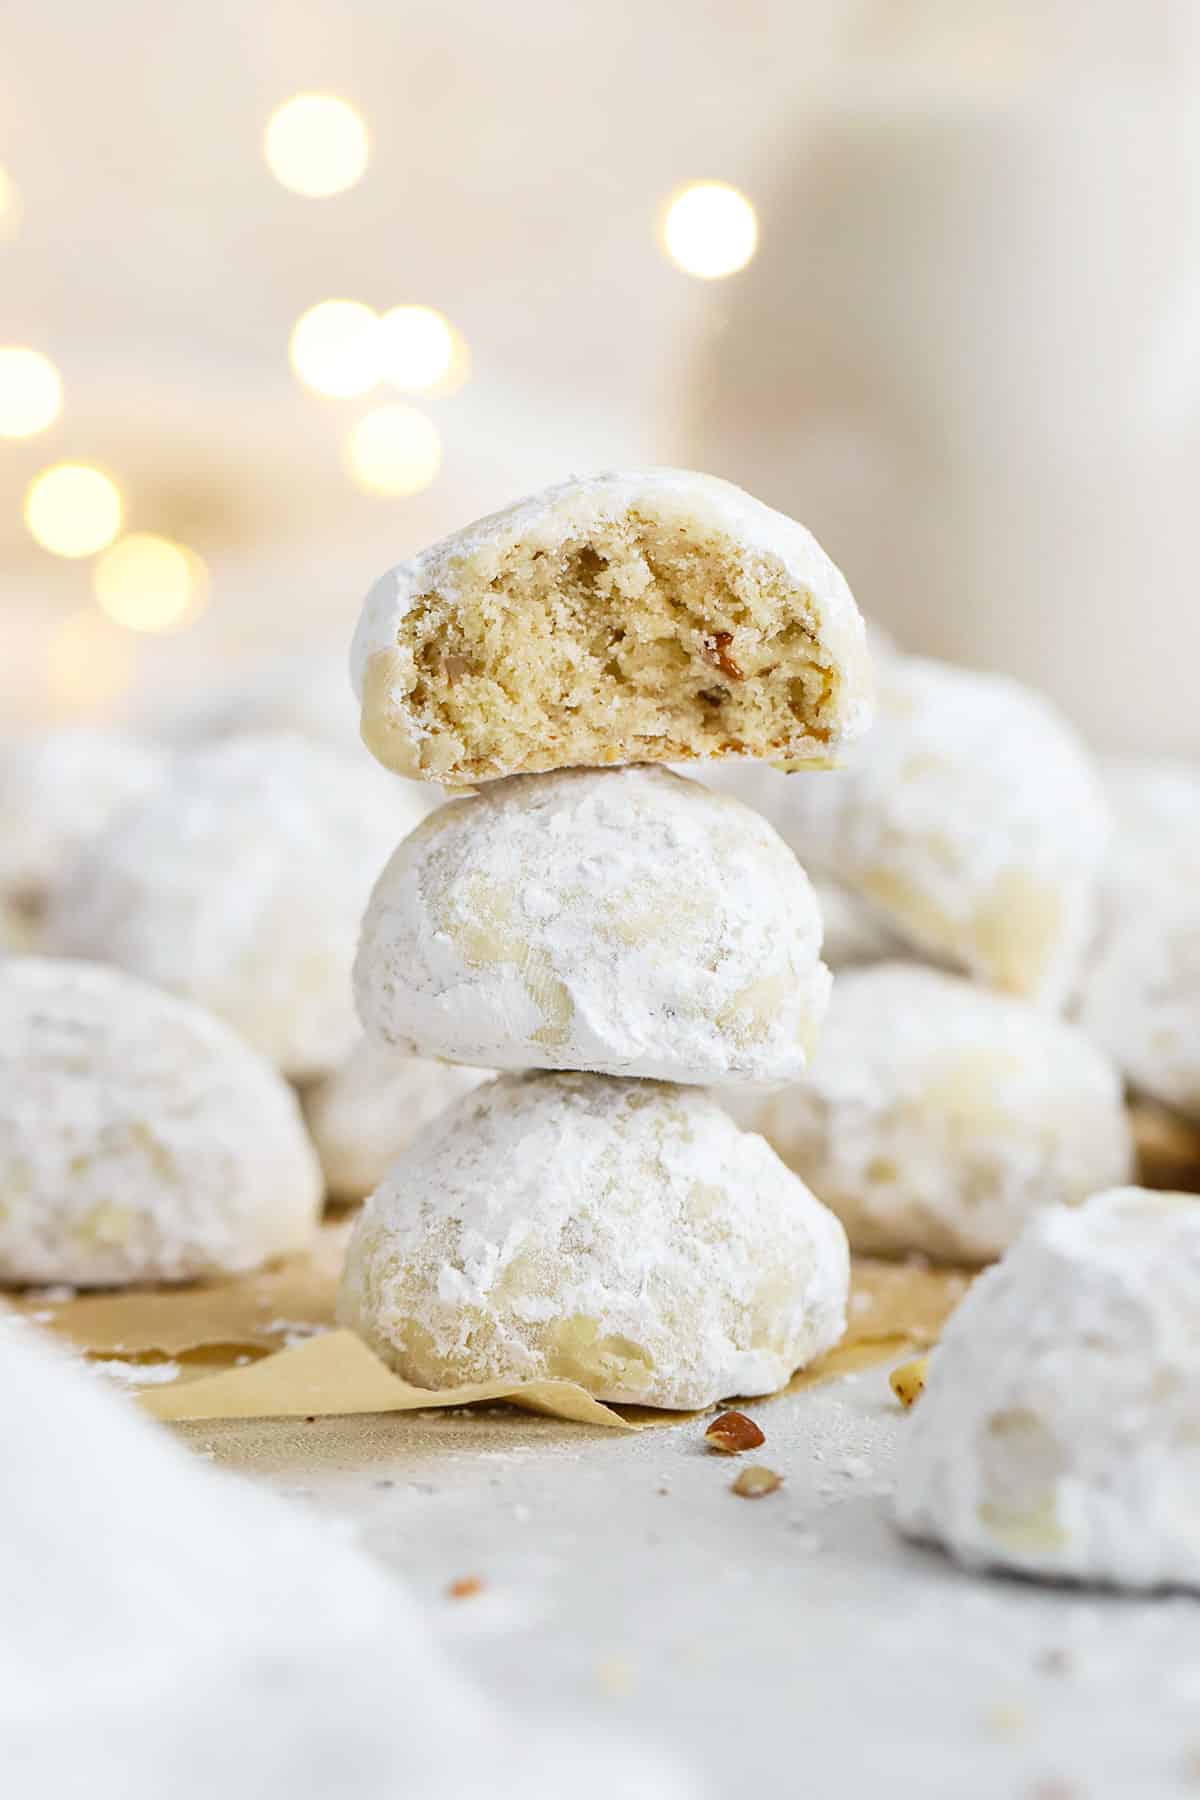 These gluten-free Mexican wedding cookies (aka gluten-free snowball cookies!) will absolutely melt in your mouth. With their delicate texture & delicious flavor, they're a perfect gluten-free holiday cookie recipe! Add them to a gluten-free holiday cookie plate or for a gluten-free cookie exchange. They're always a hit! 